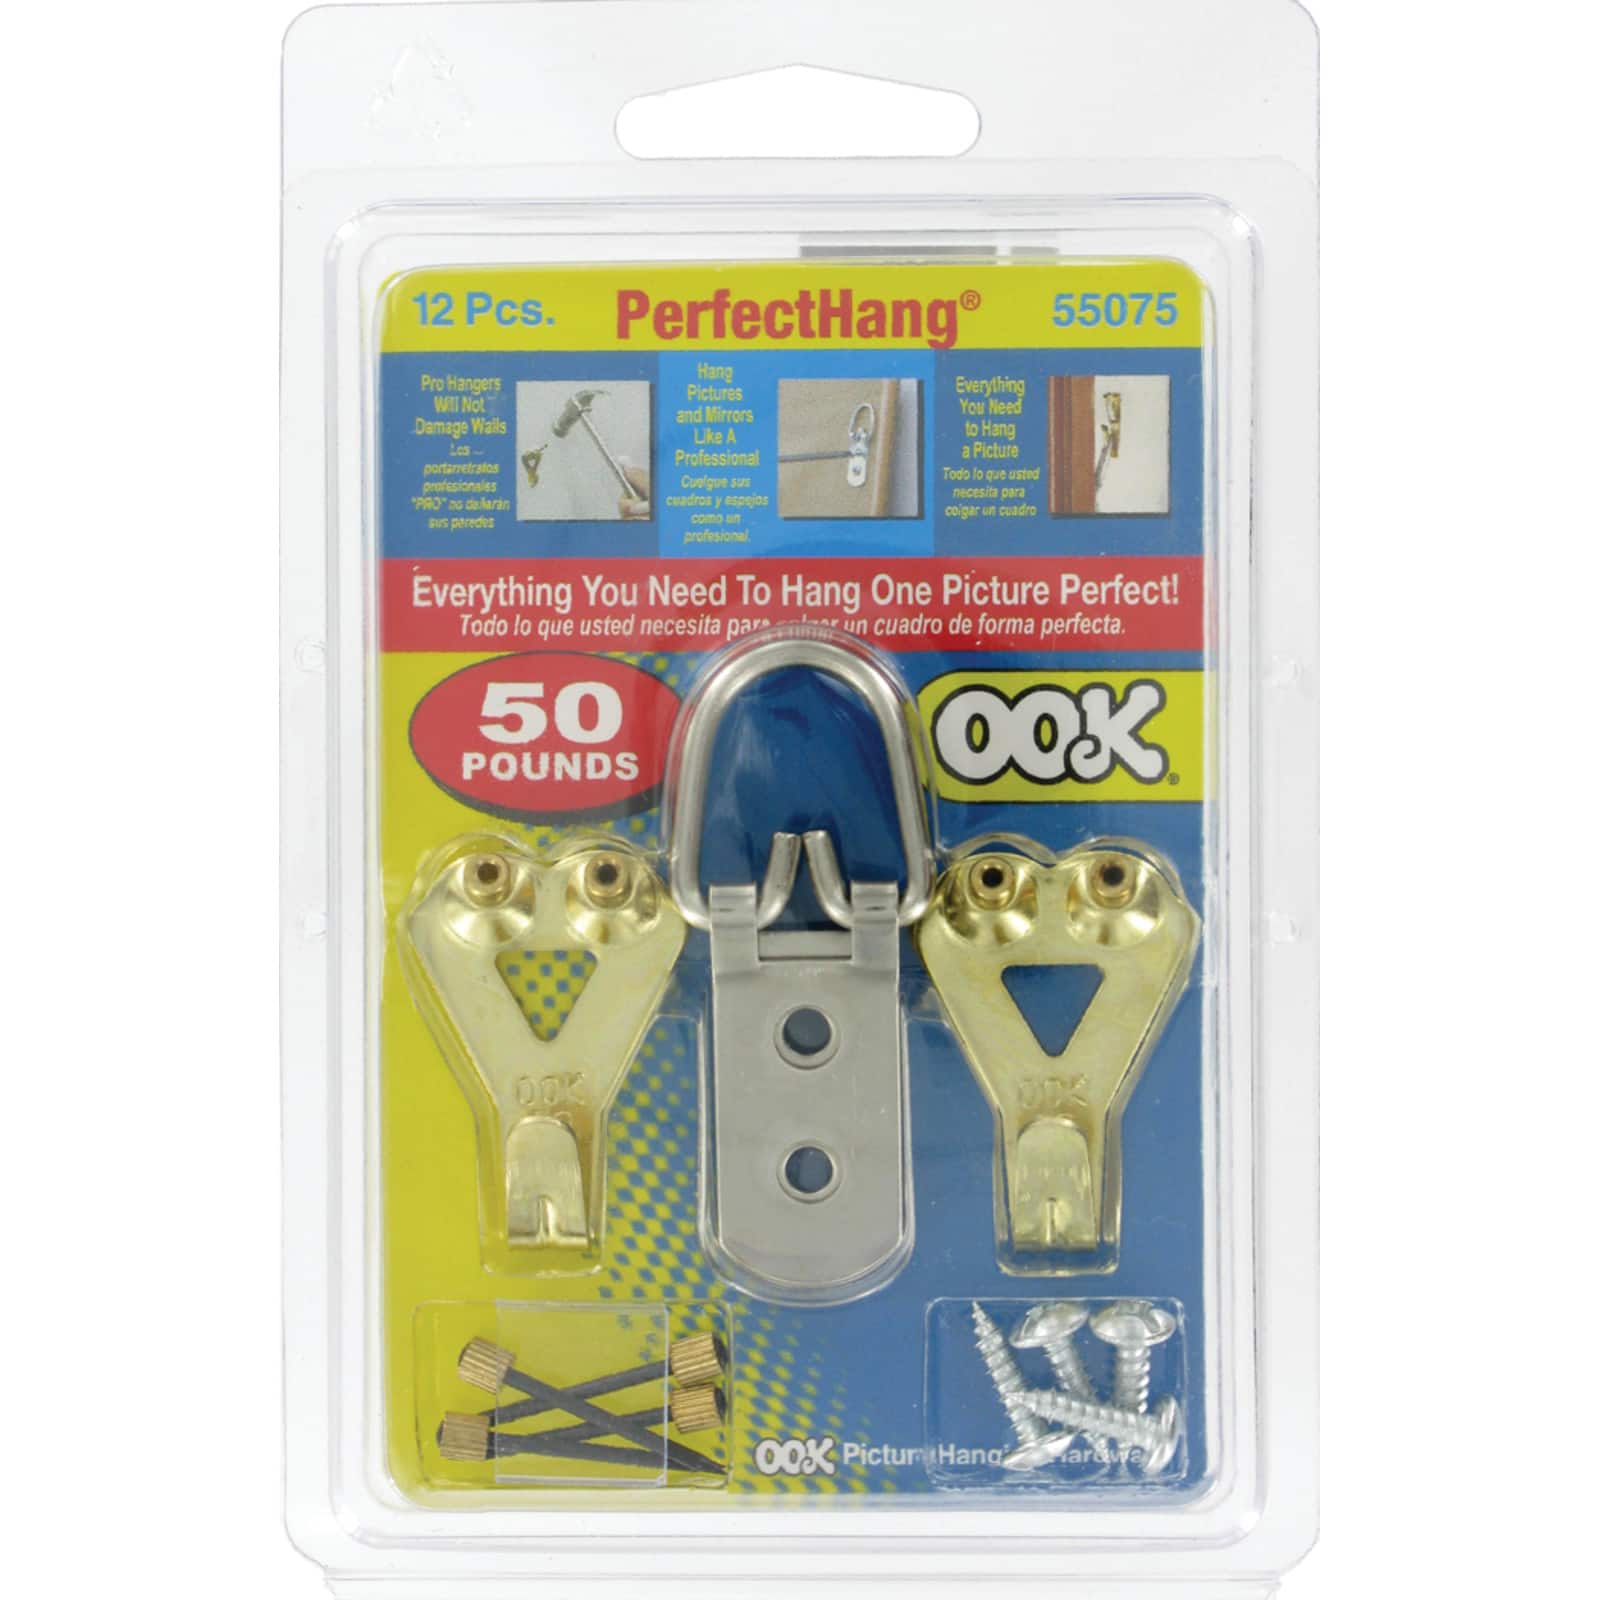 Ook&#xAE; Perfecthang&#xAE; Picture Hanging Hardware Set